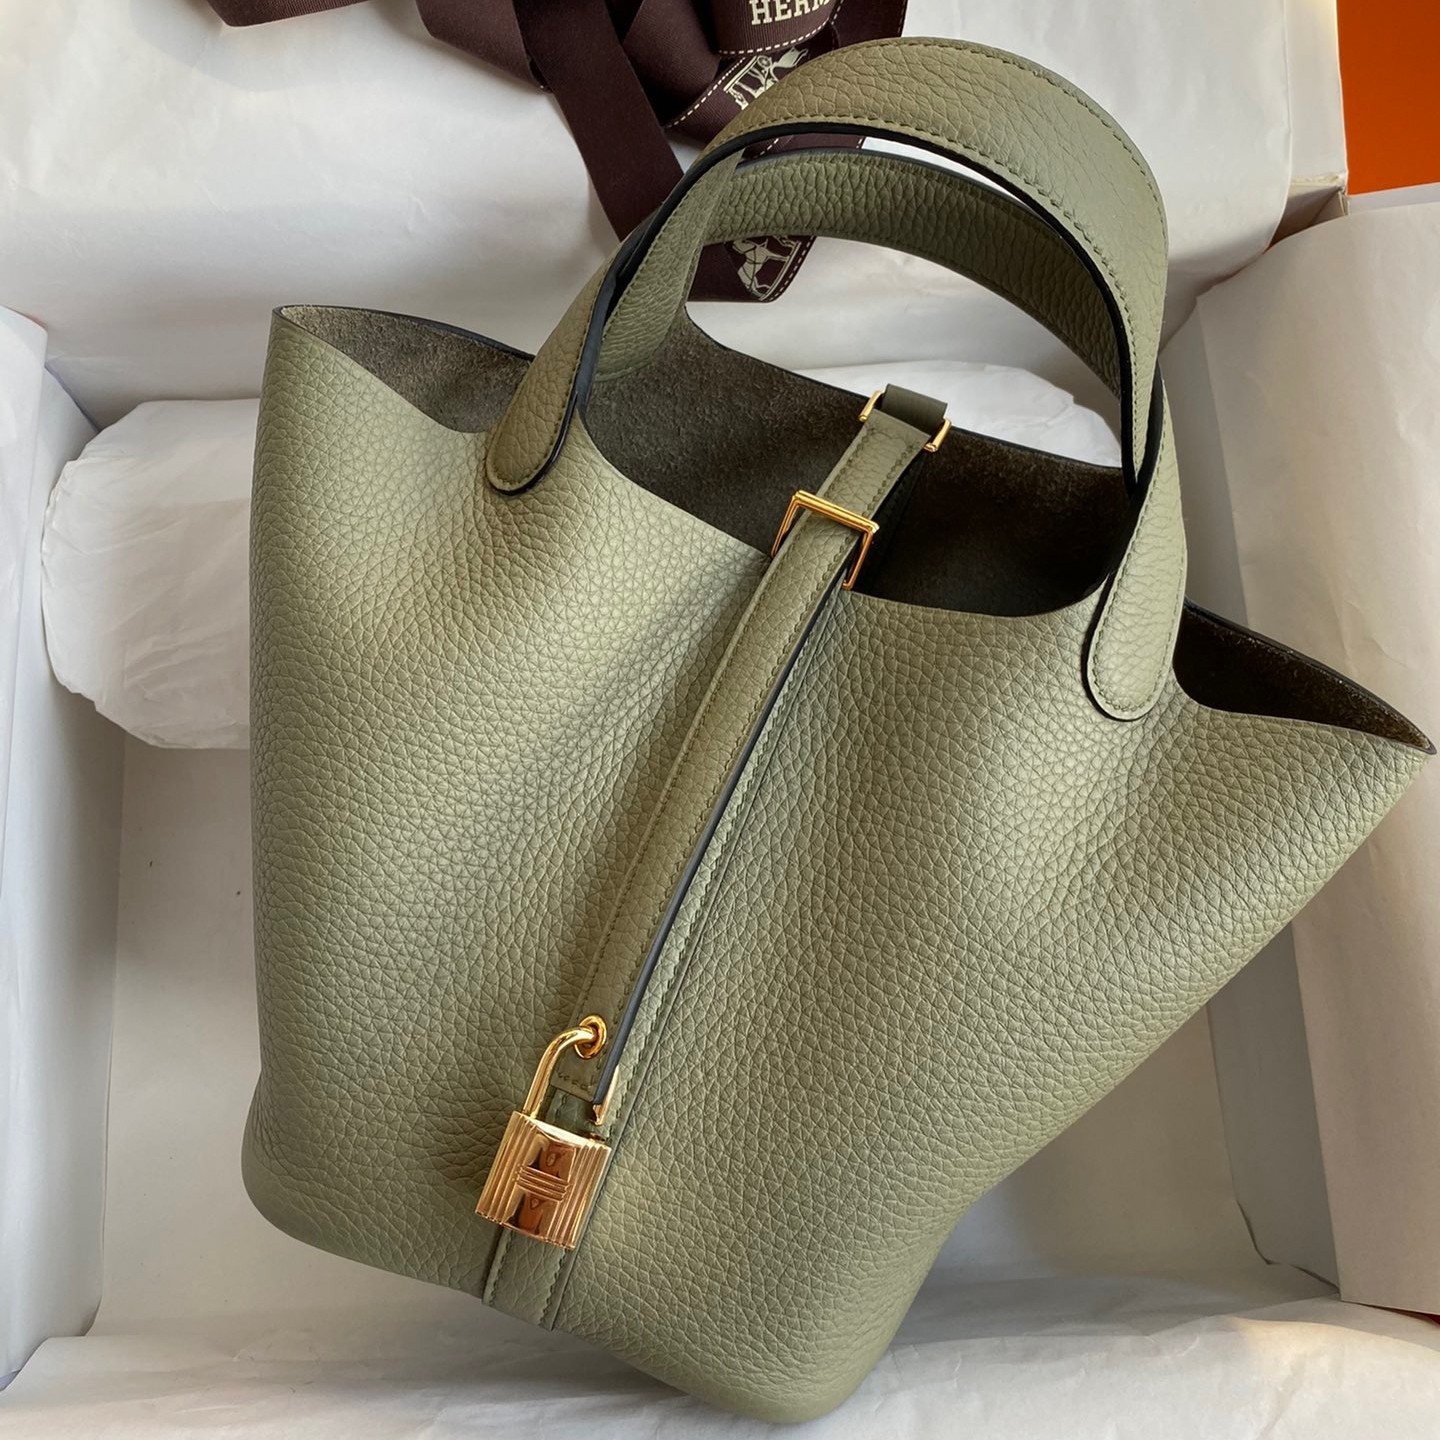 Replica Hermes Lindy 26 Handmade Bag In Sauge Clemence Leather